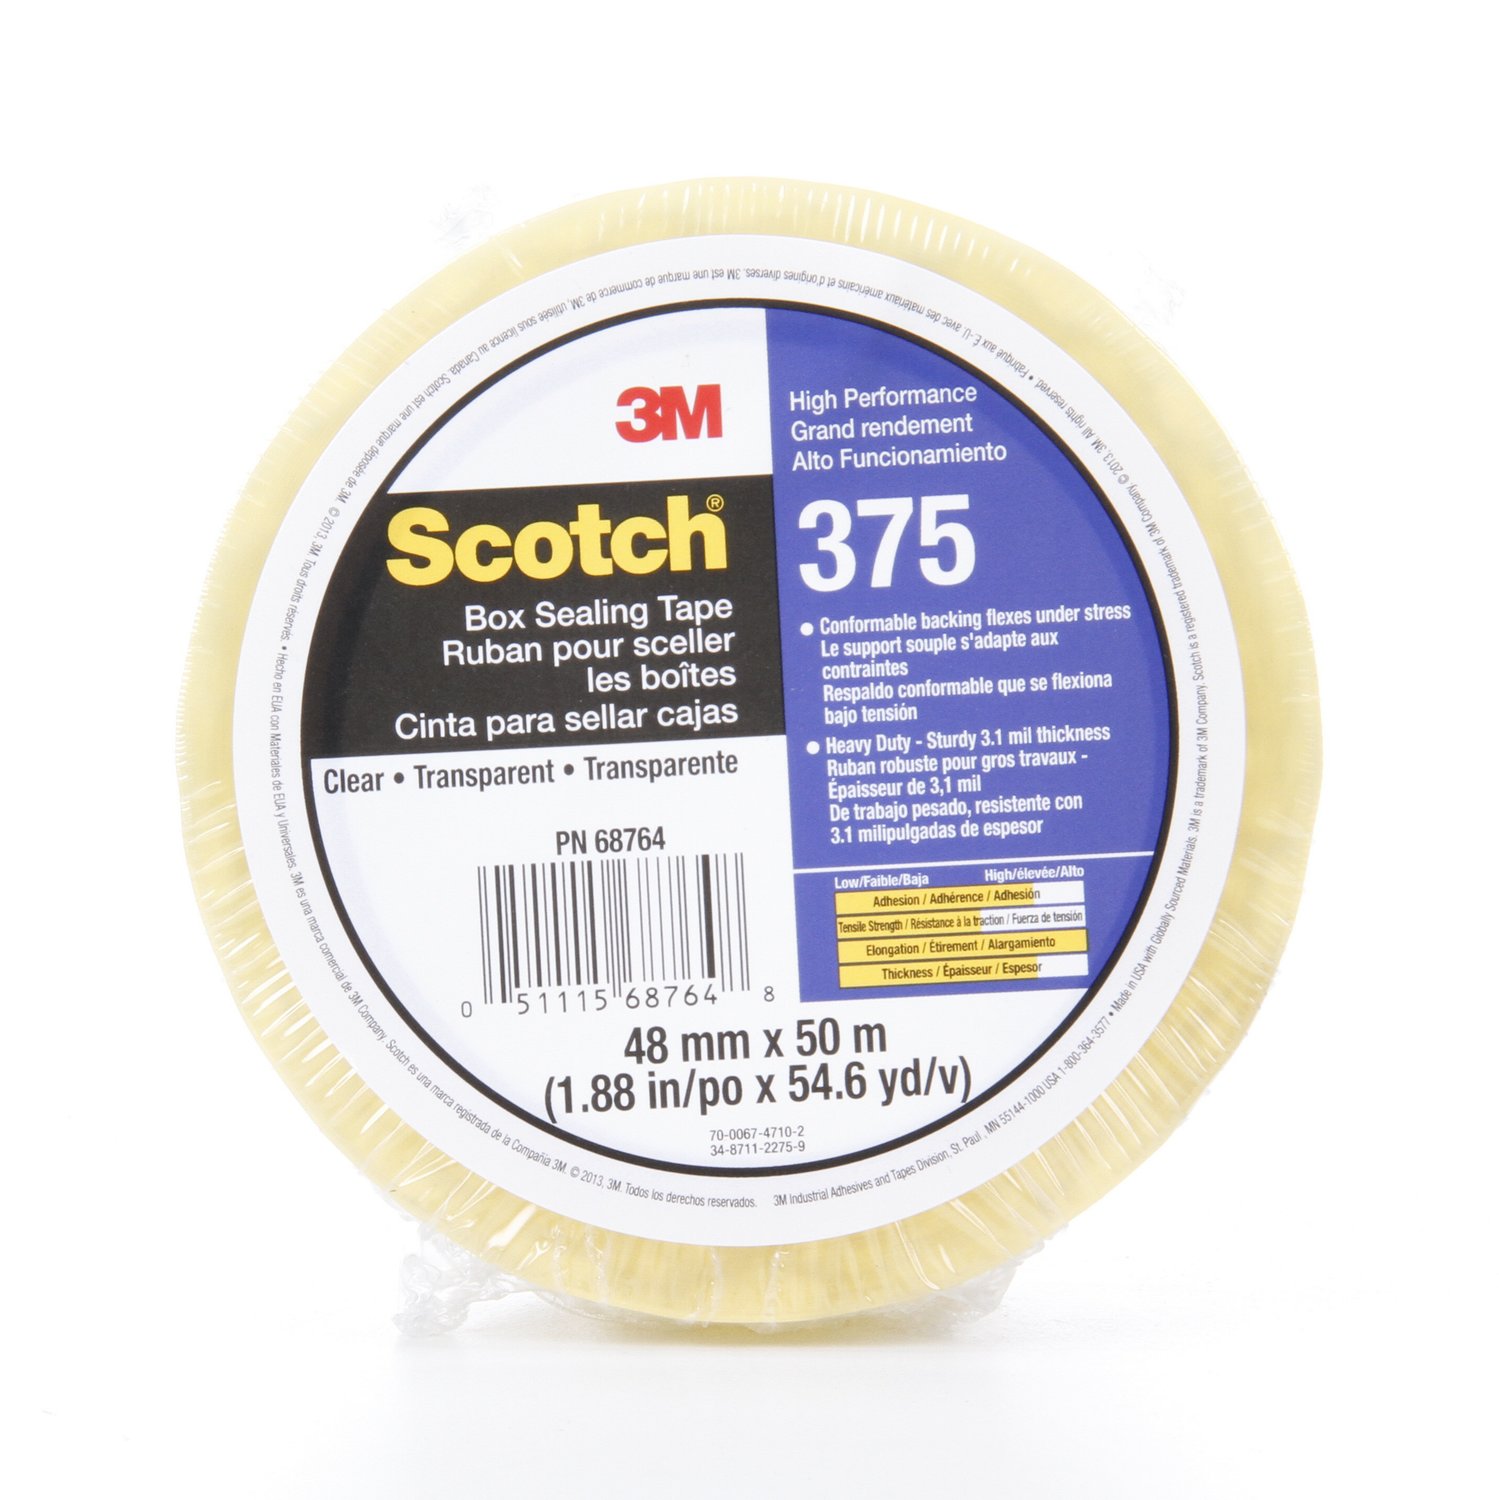 7010295456 - Scotch Box Sealing Tape 375, Clear, 48 mm x 50 m, 36/Case, Individually
Wrapped Conveniently Packaged